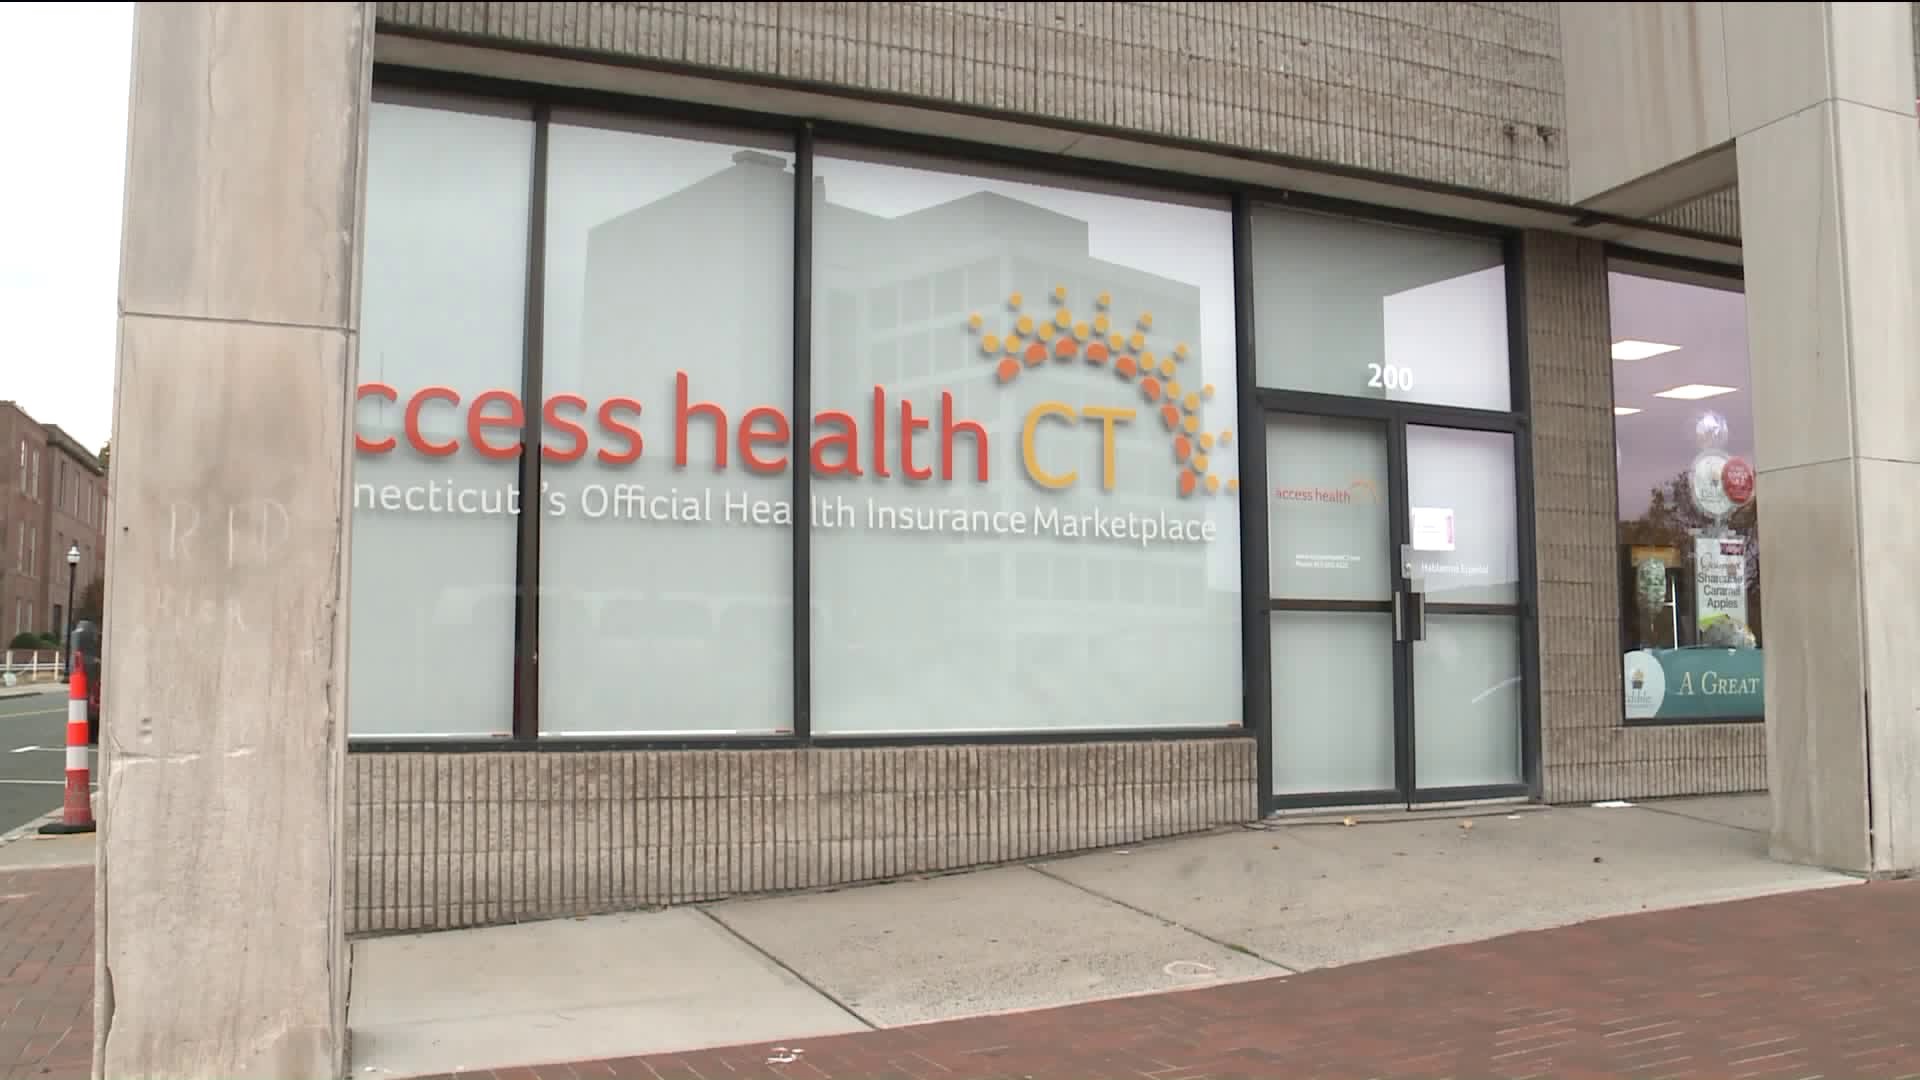 November 1 marks the first day of the Access Health CT enrollment period.